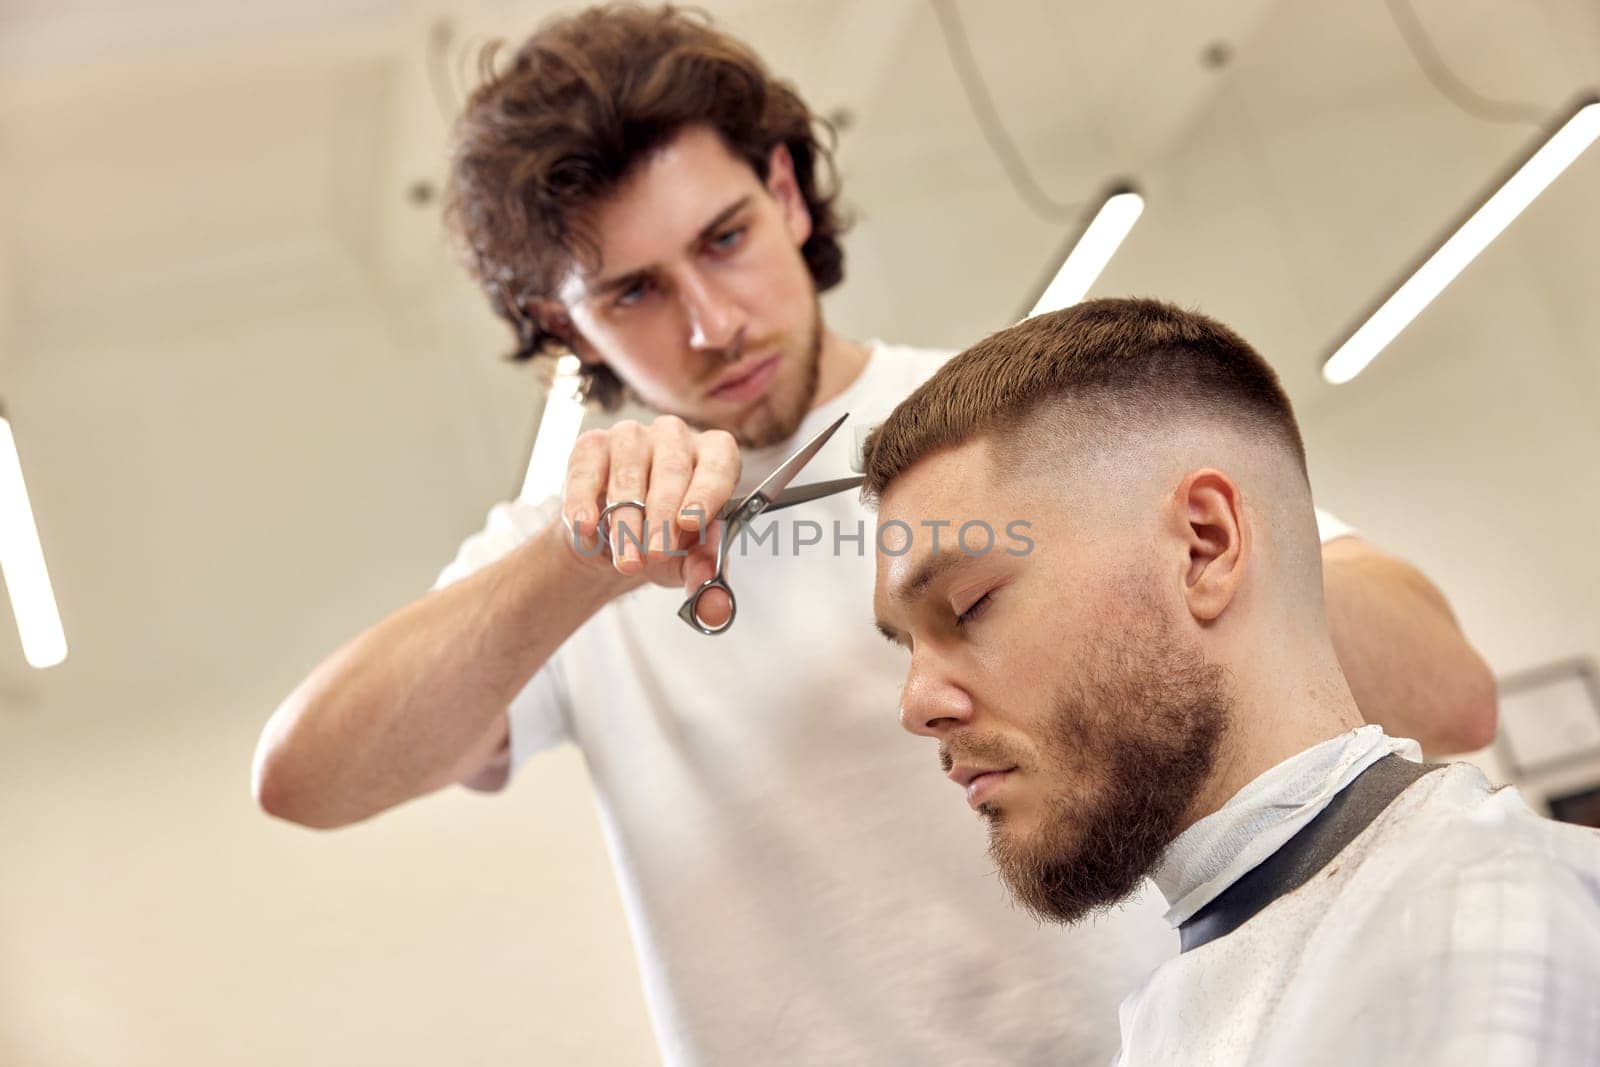 Professional barber does haircut for caucasian bearded man using comb and scissors at barber shop. close-up